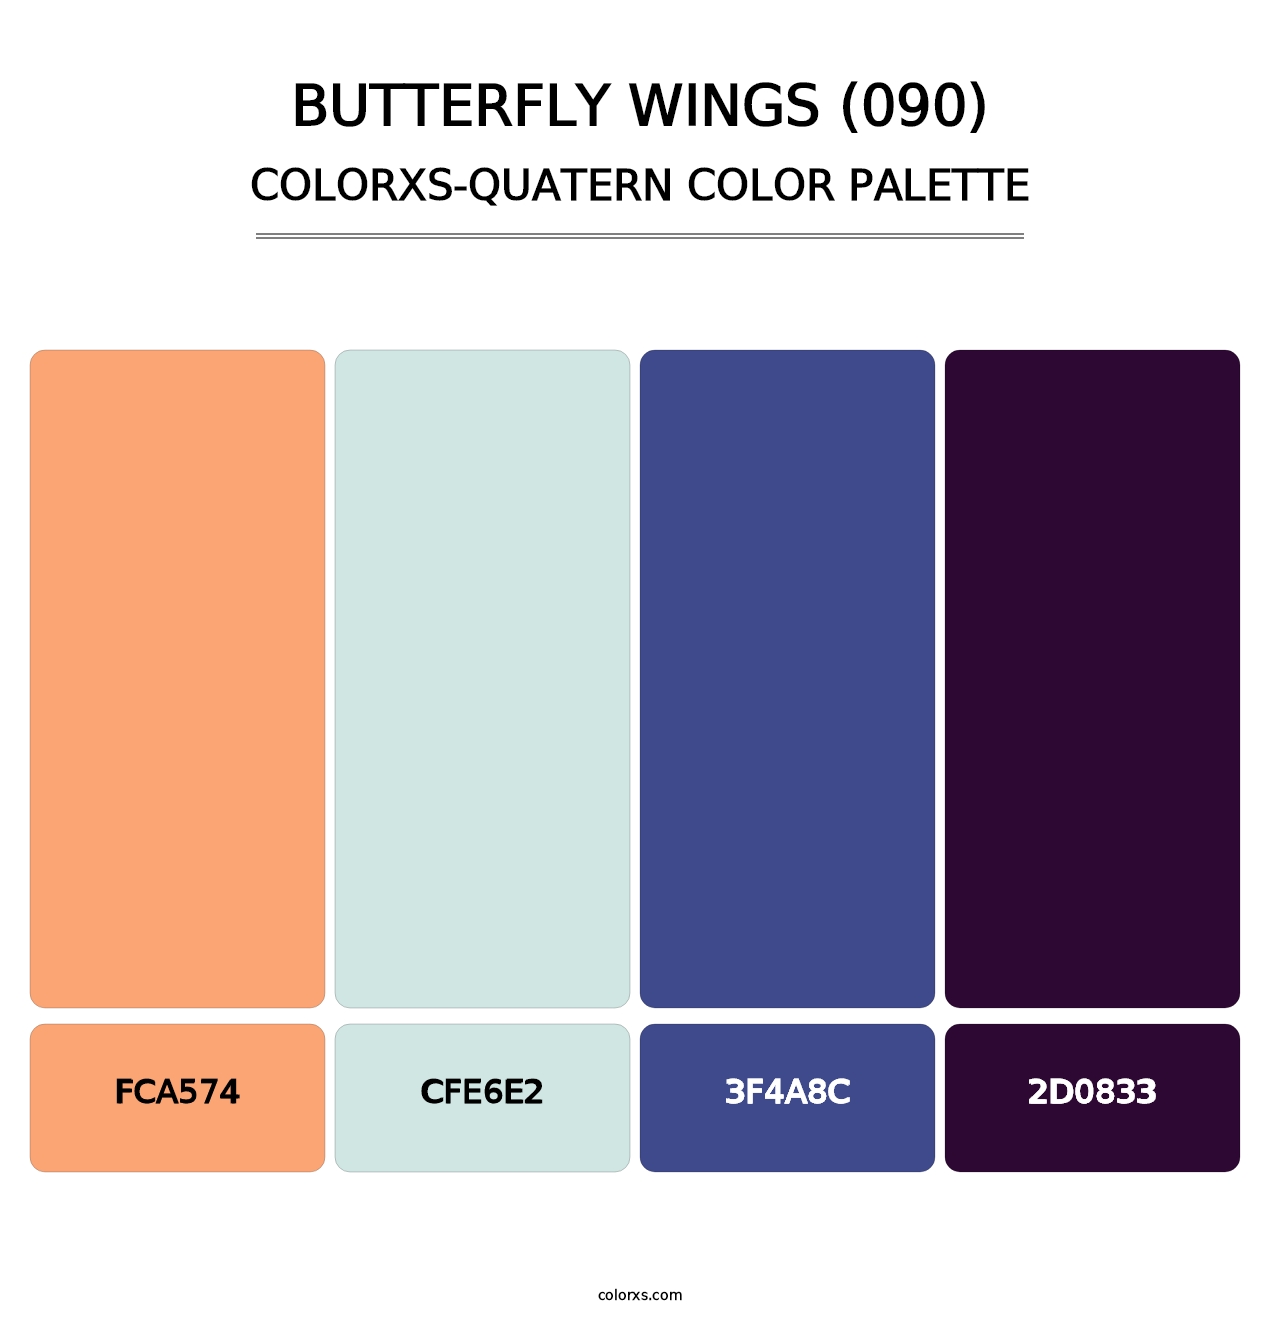 Butterfly Wings (090) - Colorxs Quatern Palette